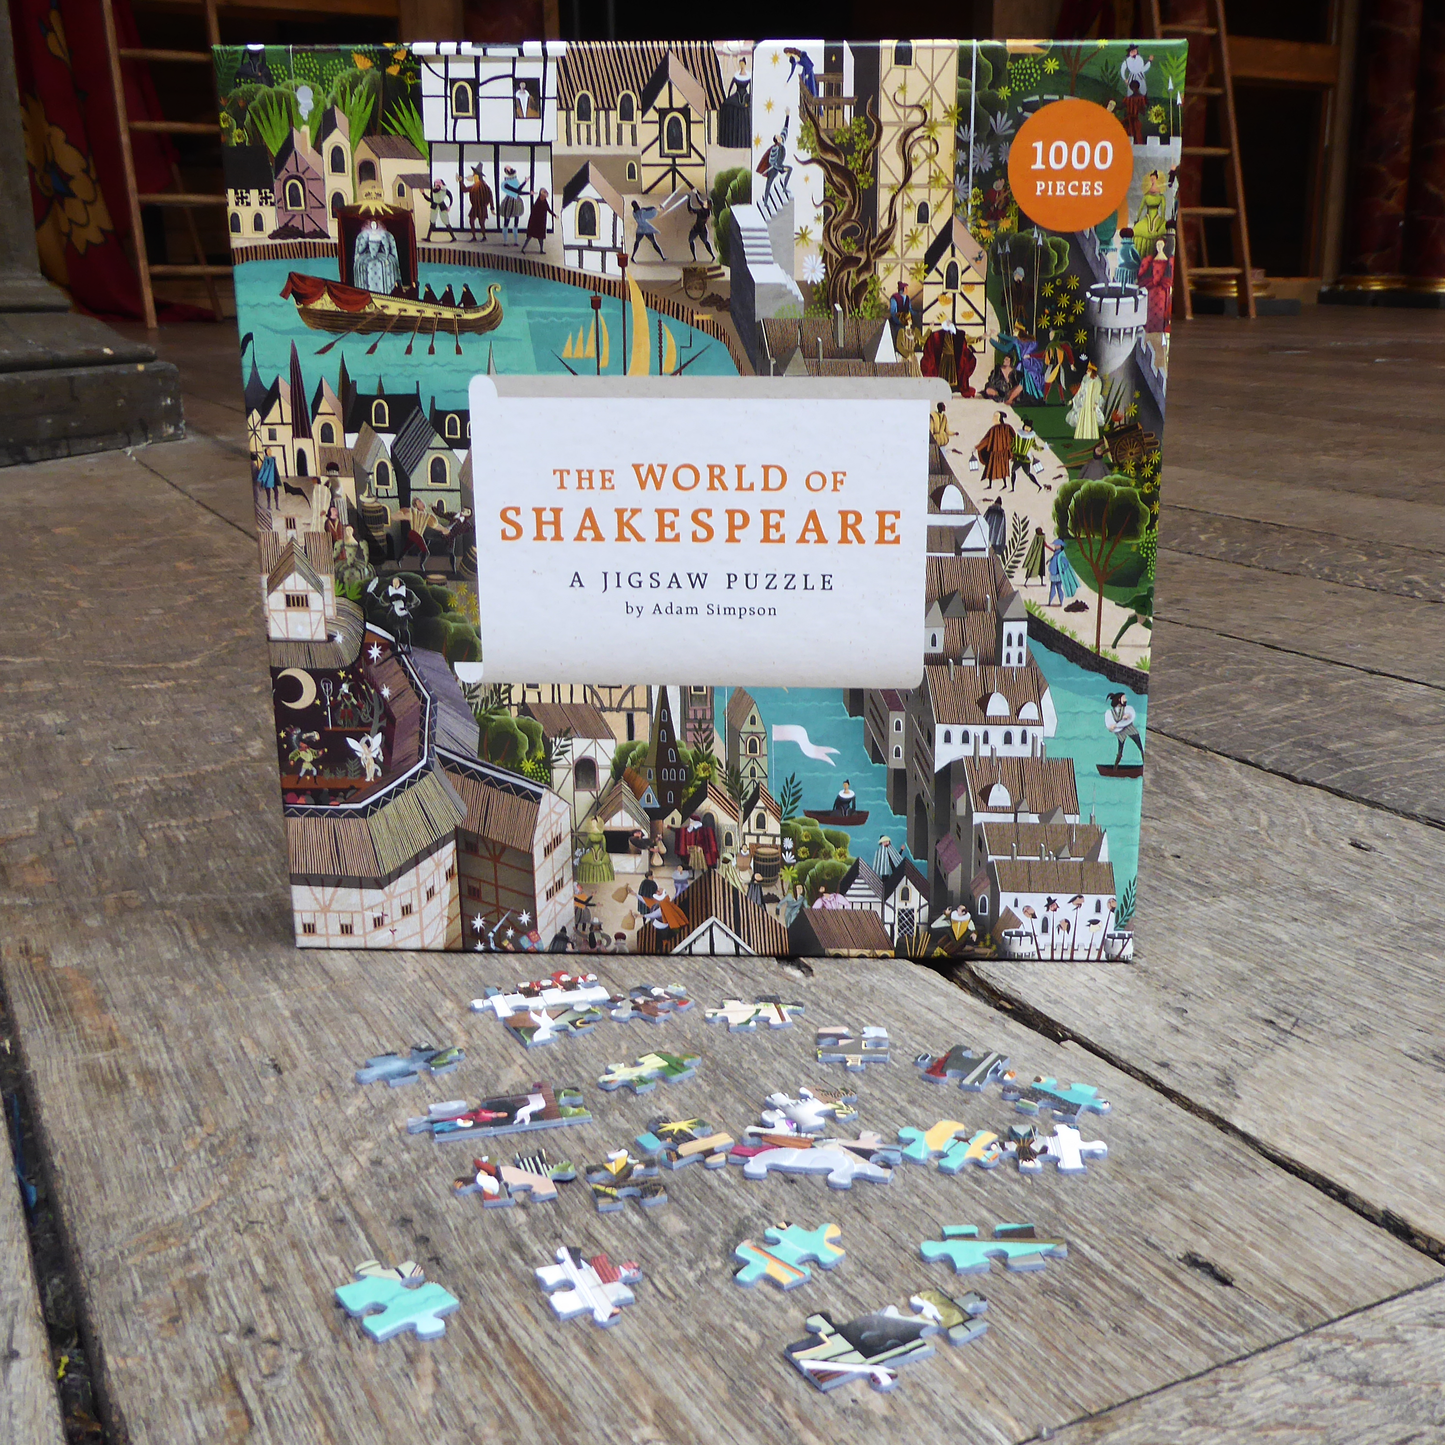 1000 piece jigsaw puzzle with colourful image of Shakespeare's London